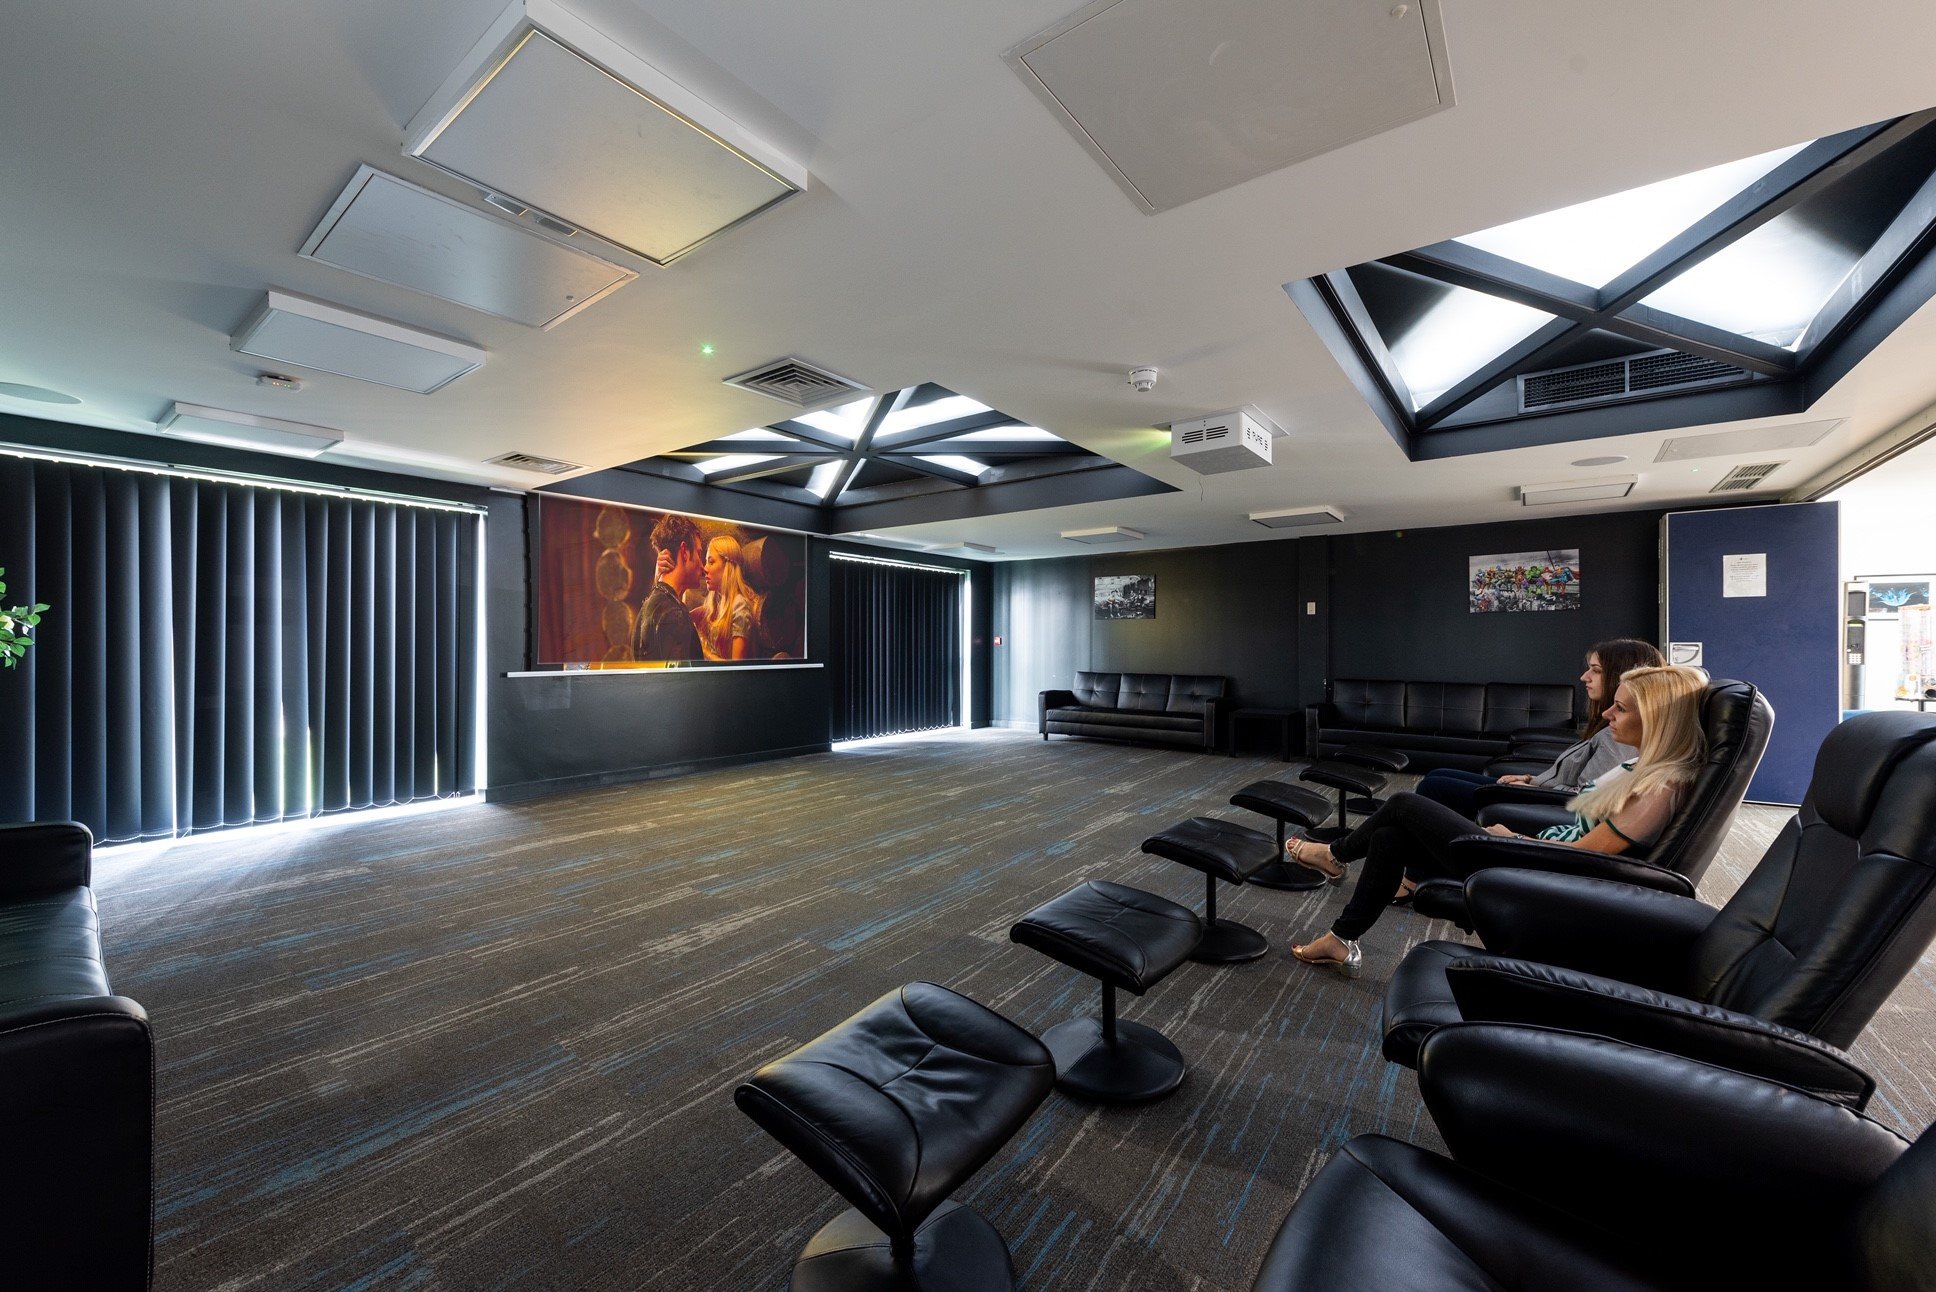 Luton University Student Village with a Pure Theatre Home Cinema